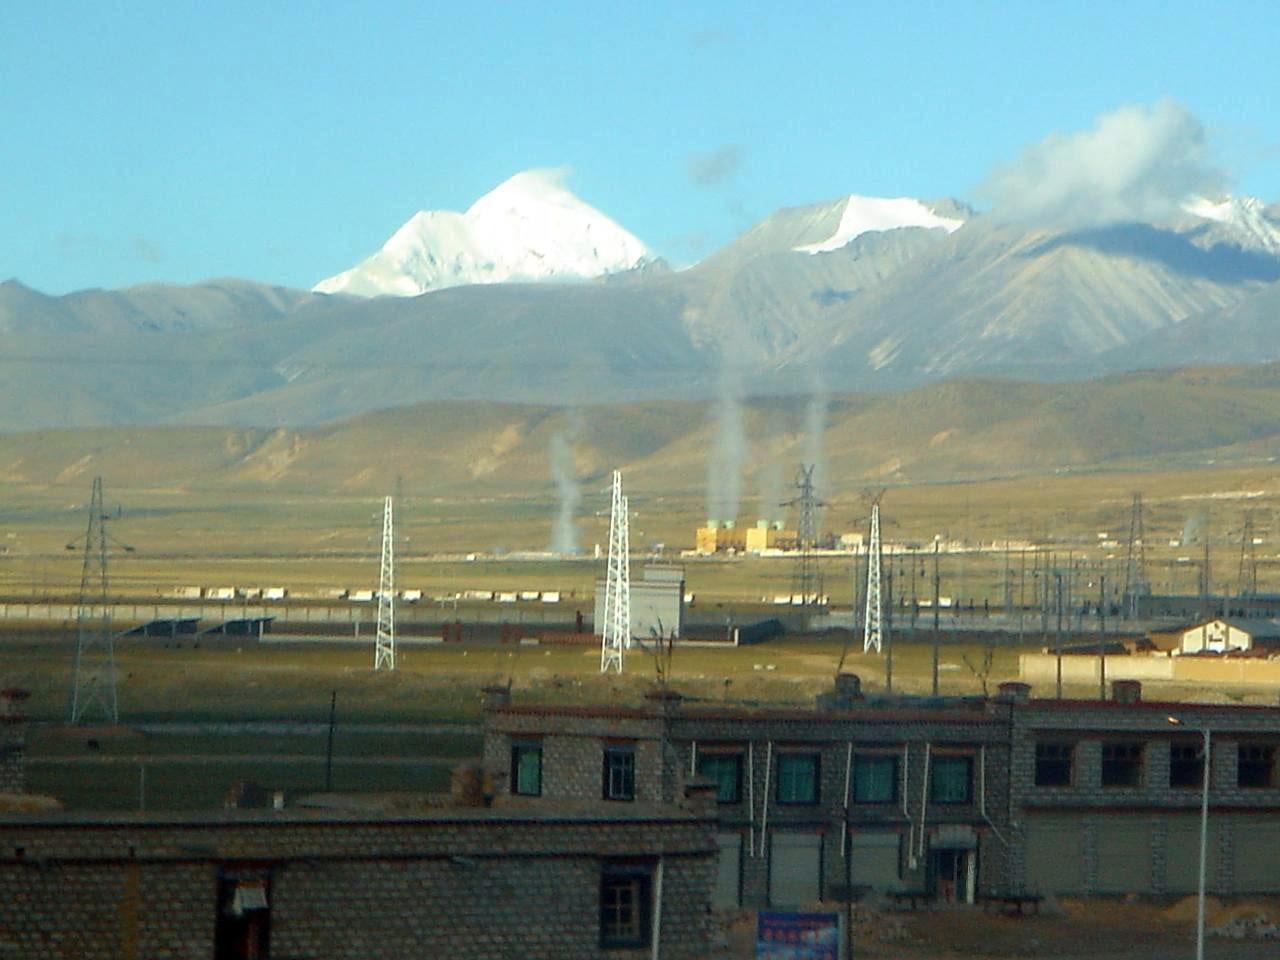 A geothermal power plant in a mountainous landscape